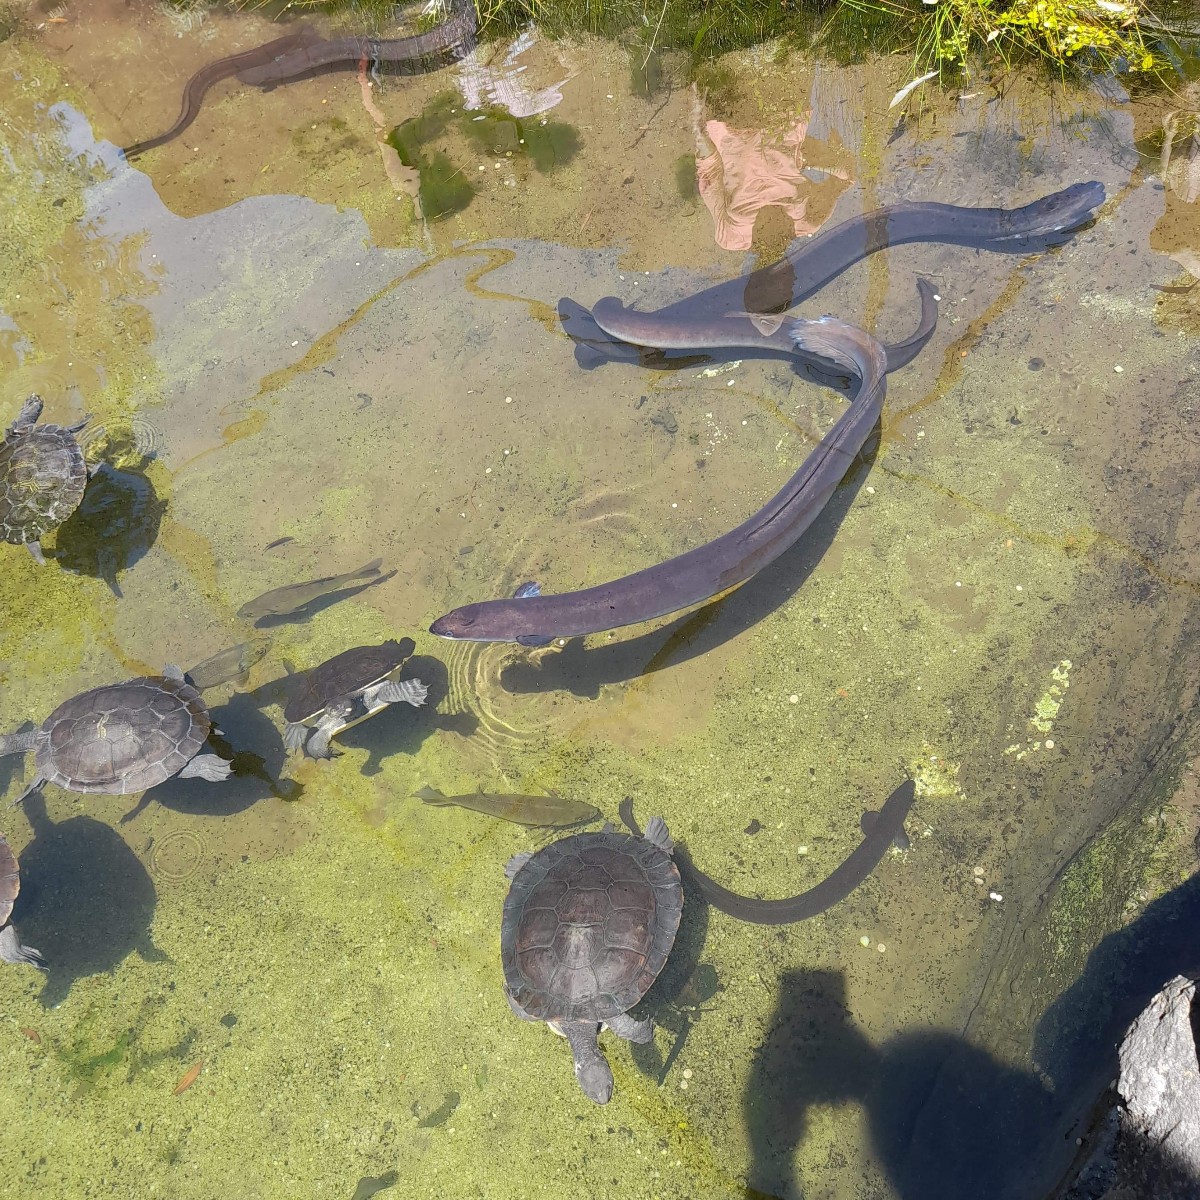 The eels and turtle of our Milarri Garden pond are making the most out of these sunny days 🌞 📸 Captured by Visitor Engagement Officer Joanie during our daily eel feeding presentation, held daily at 1:45pm. Learn more and book museum tickets online via: fal.cn/3bFFZ